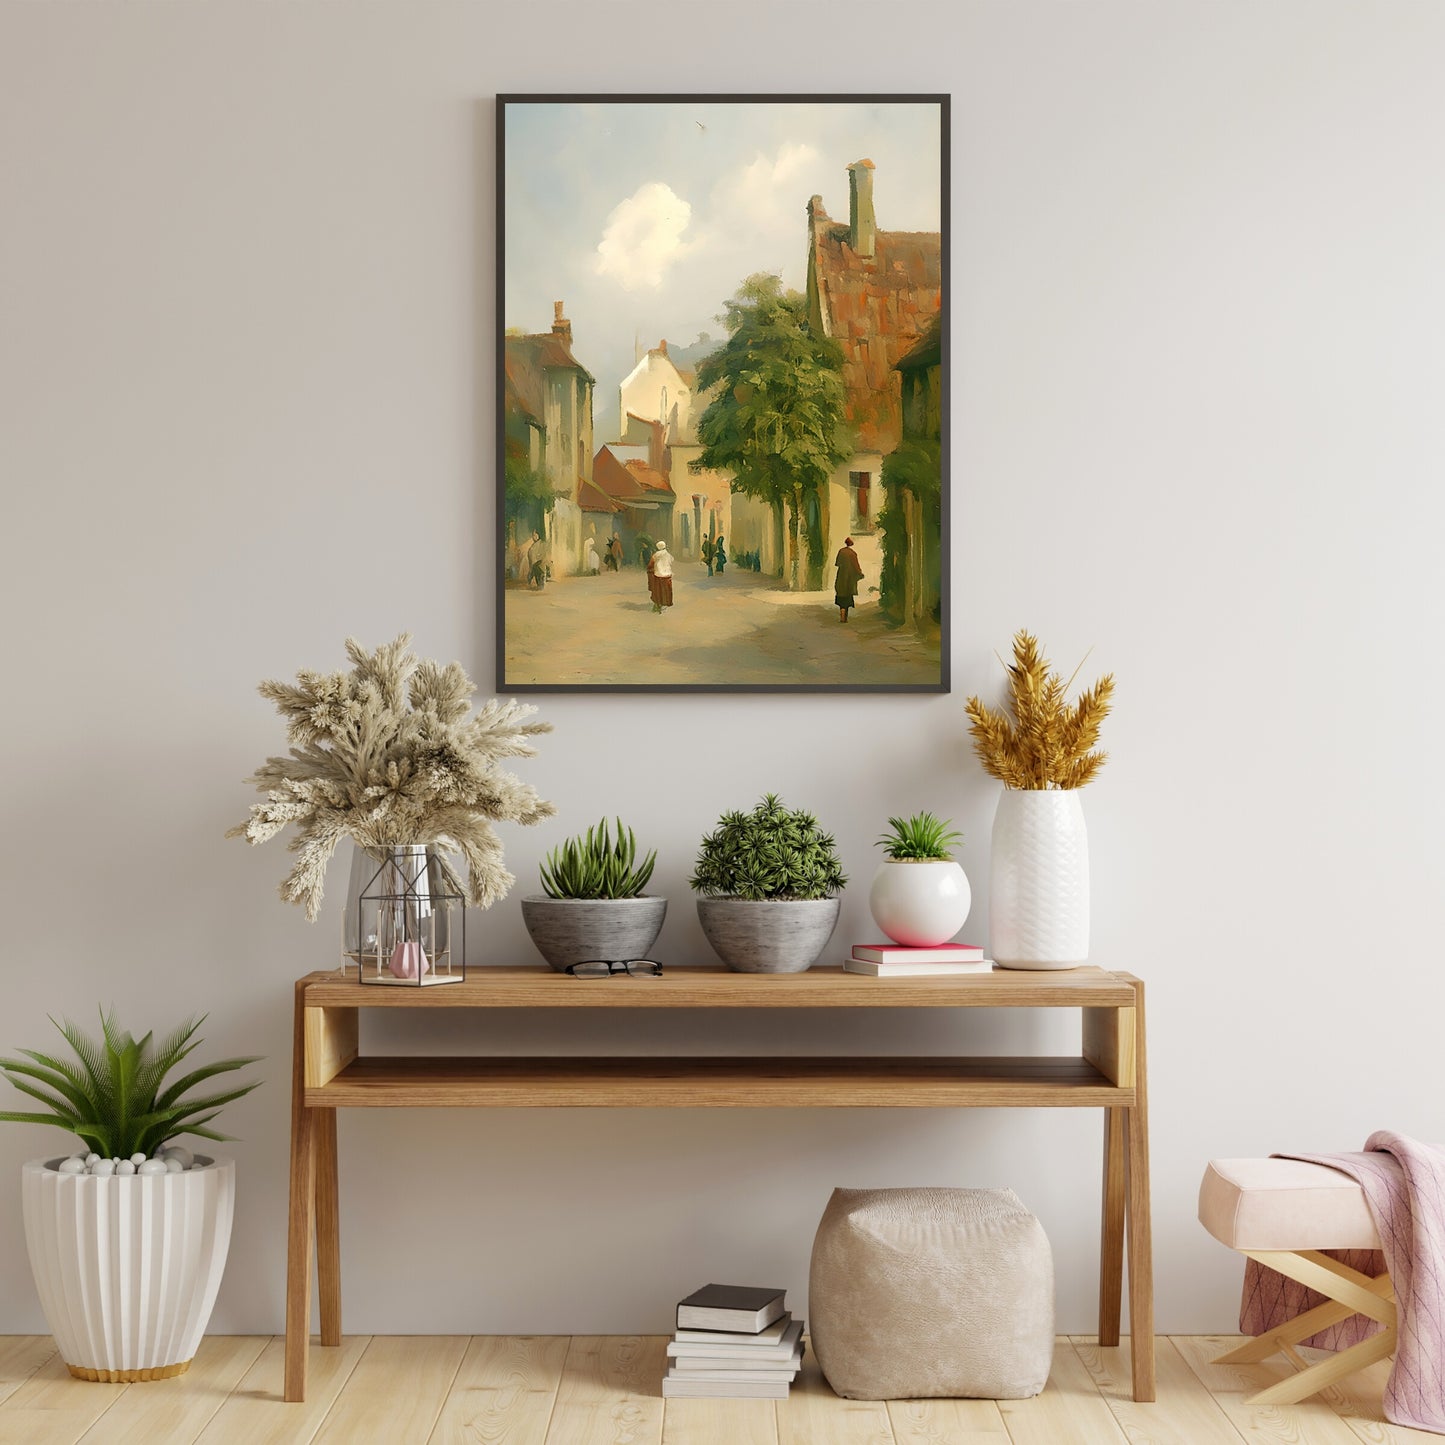 Vintage Town Life Paper Poster Prints Vintage Oil Painting & Wall Art of Old Town, Old City Prints, Pastel Colors, Impressionistic Art